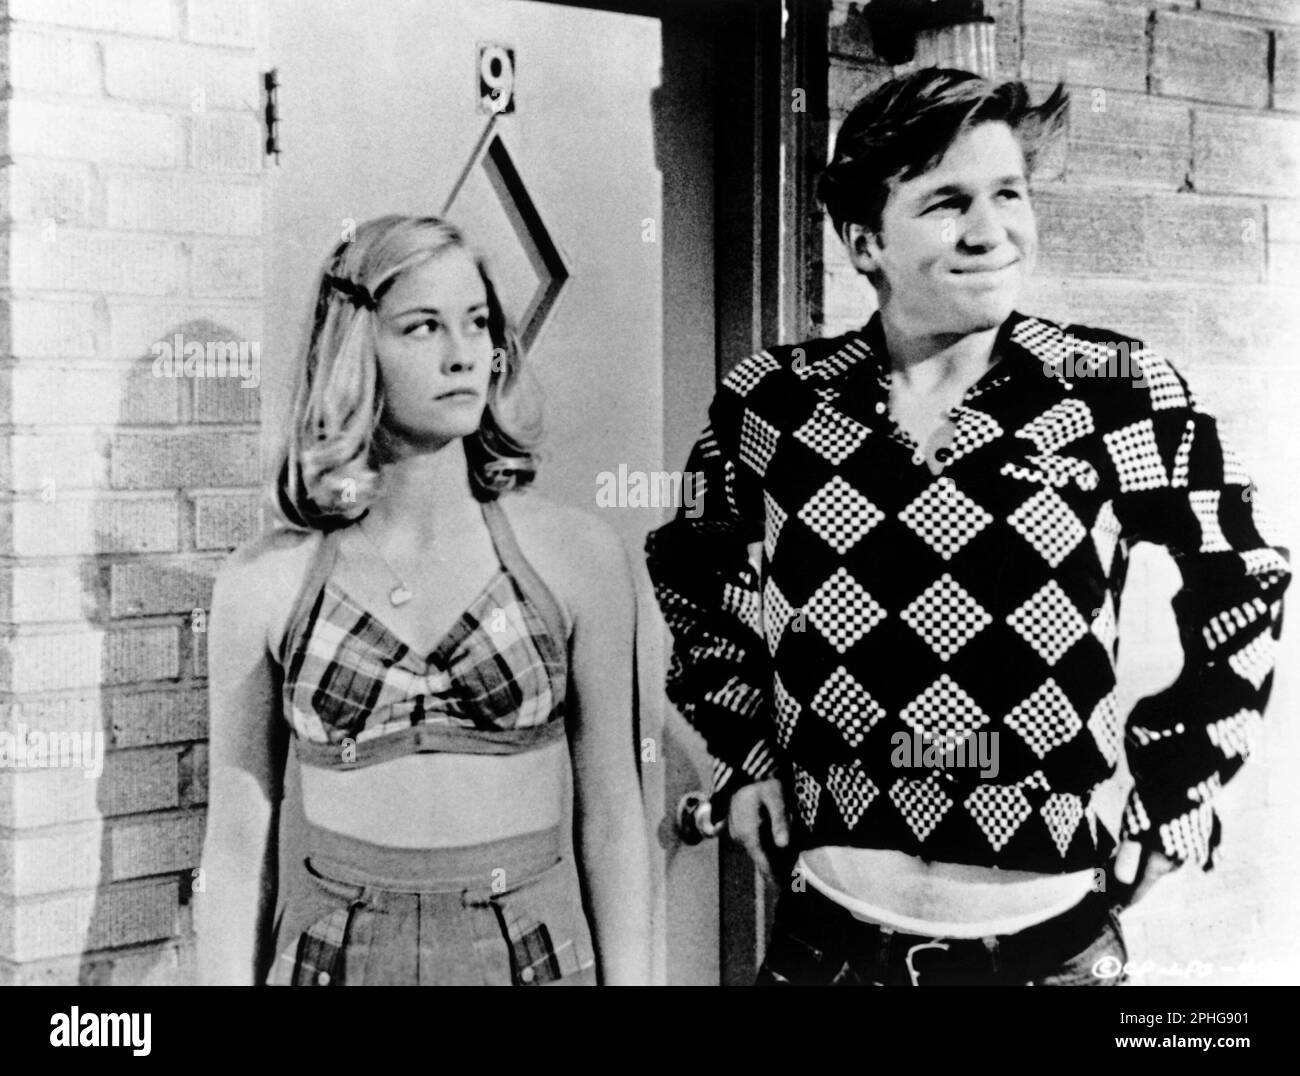 JEFF BRIDGES and CYBILL SHEPHERD in THE LAST PICTURE SHOW (1971), directed by PETER BOGDANOVICH. Credit: COLUMBIA PICTURES / Album Stock Photo